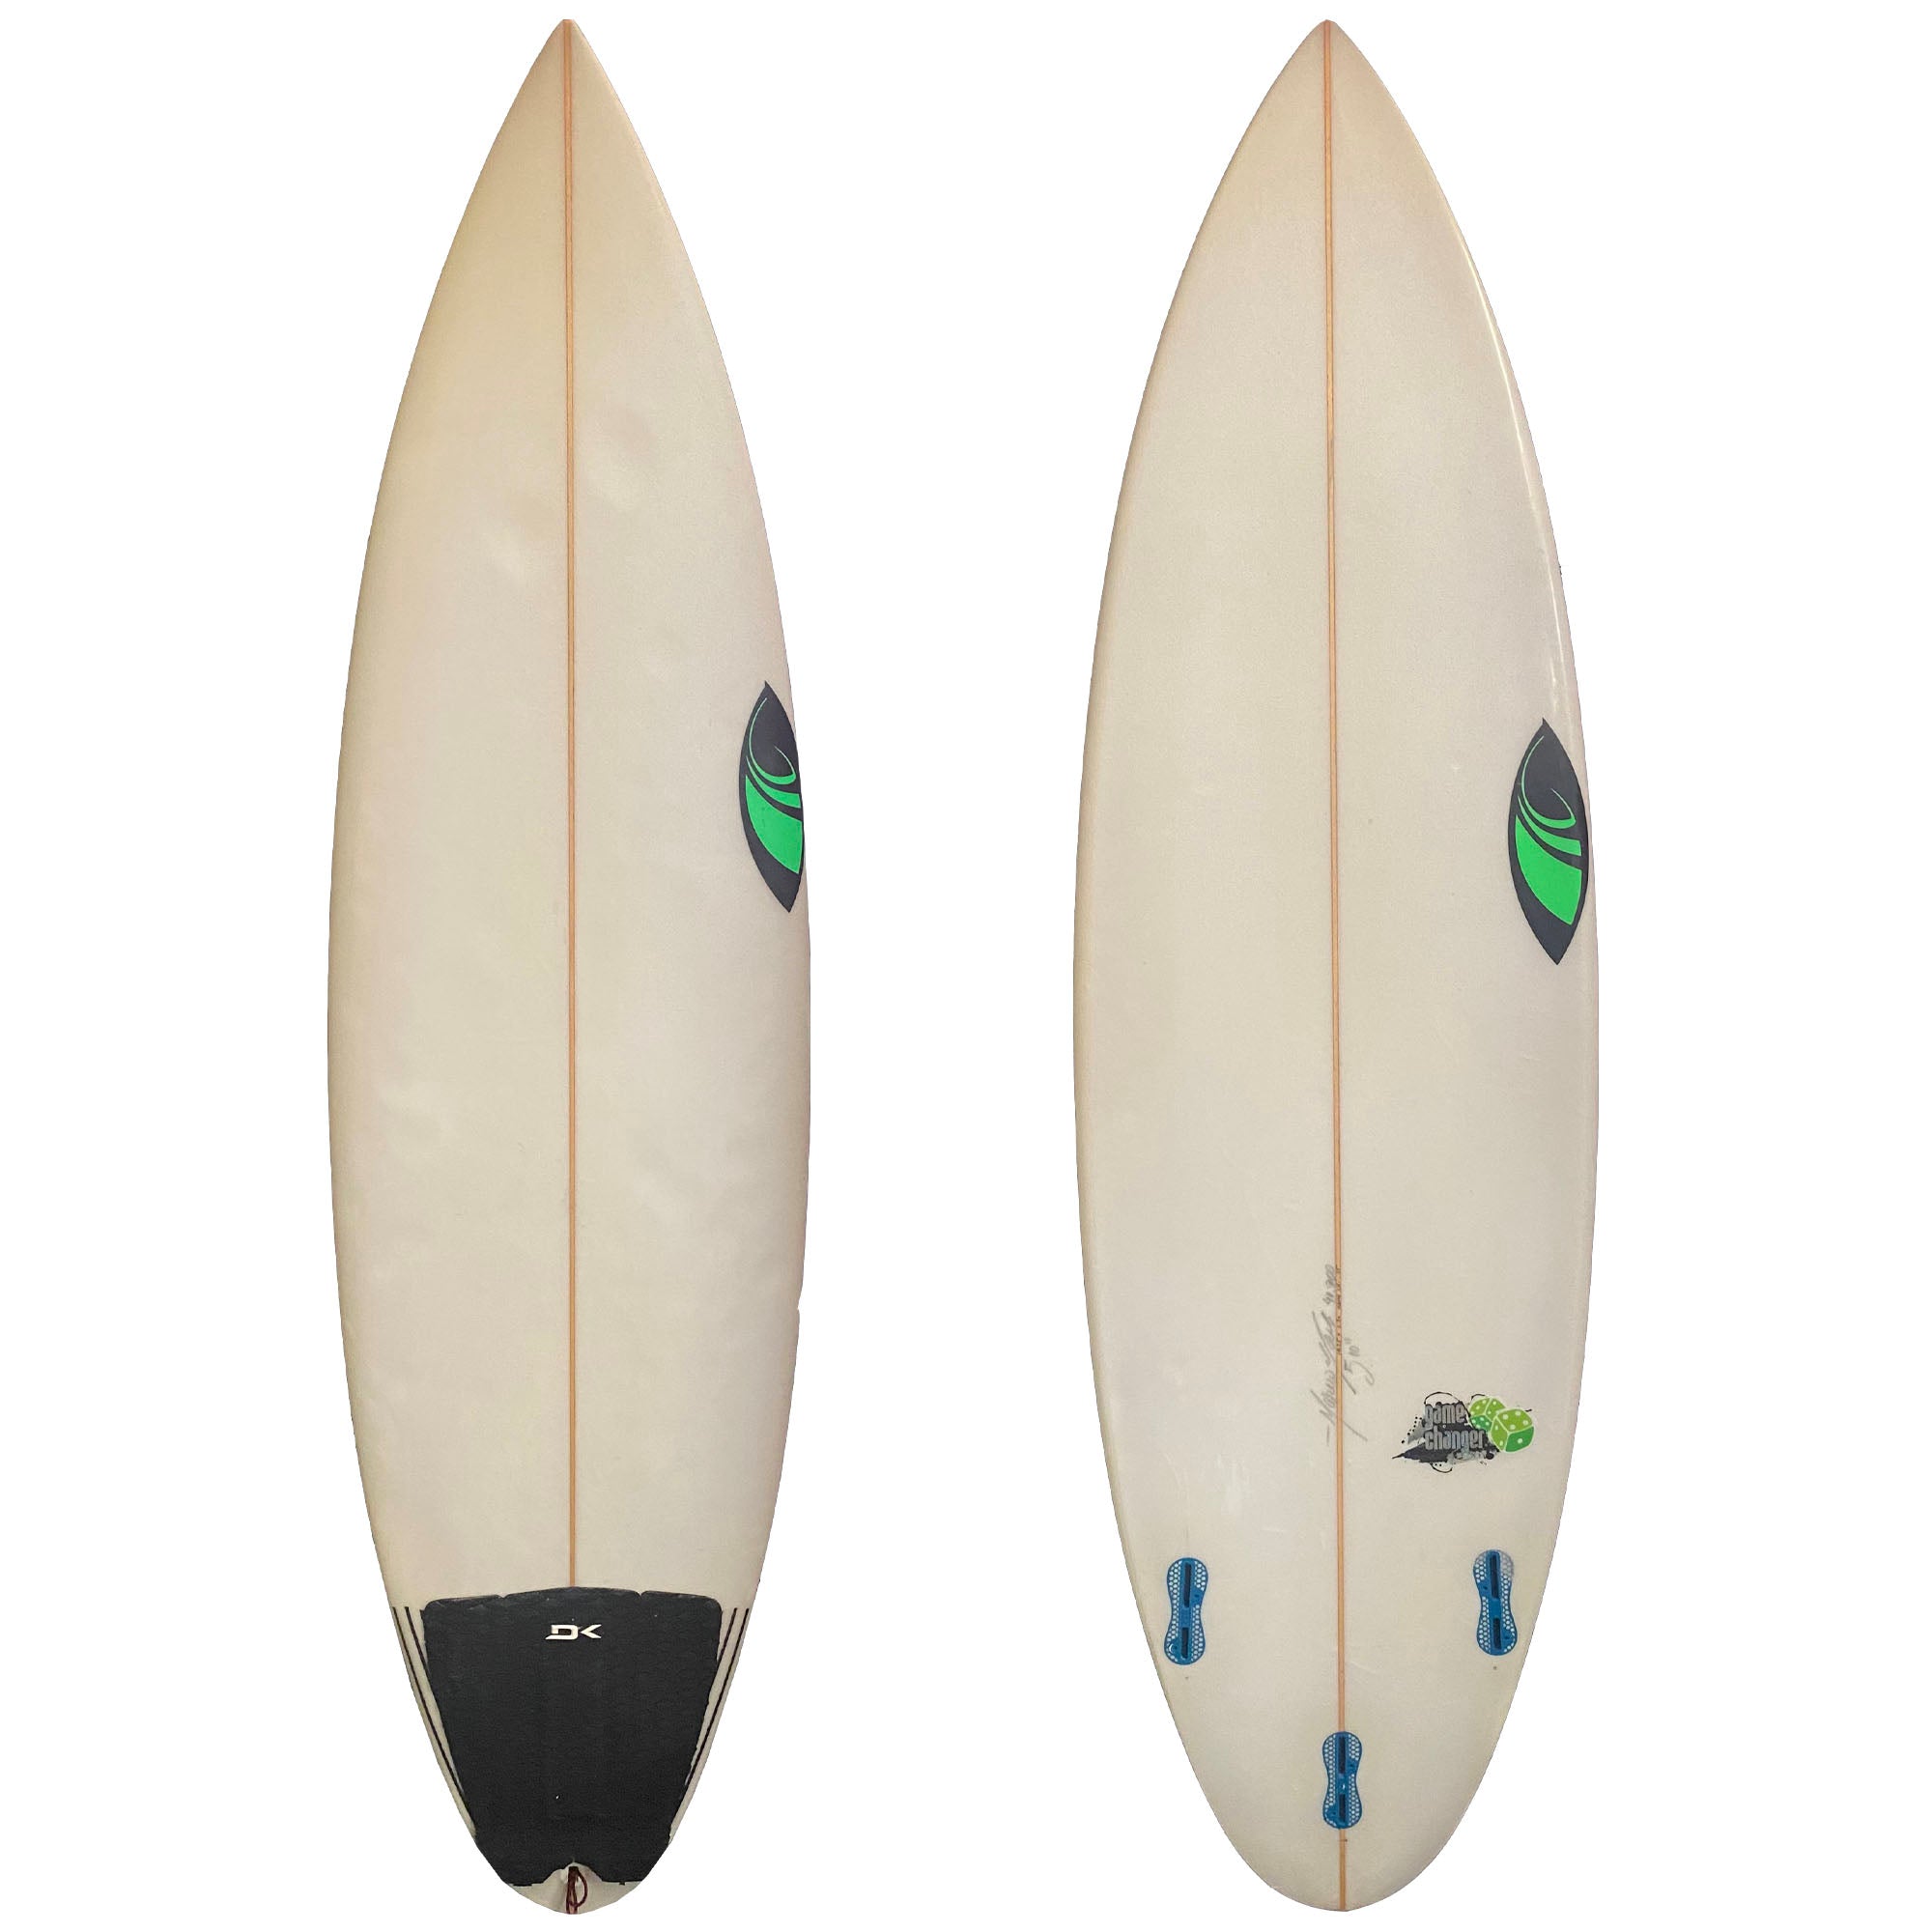 Sharp Eye HT2 5'8 Consignment Surfboard - Surf Station Store